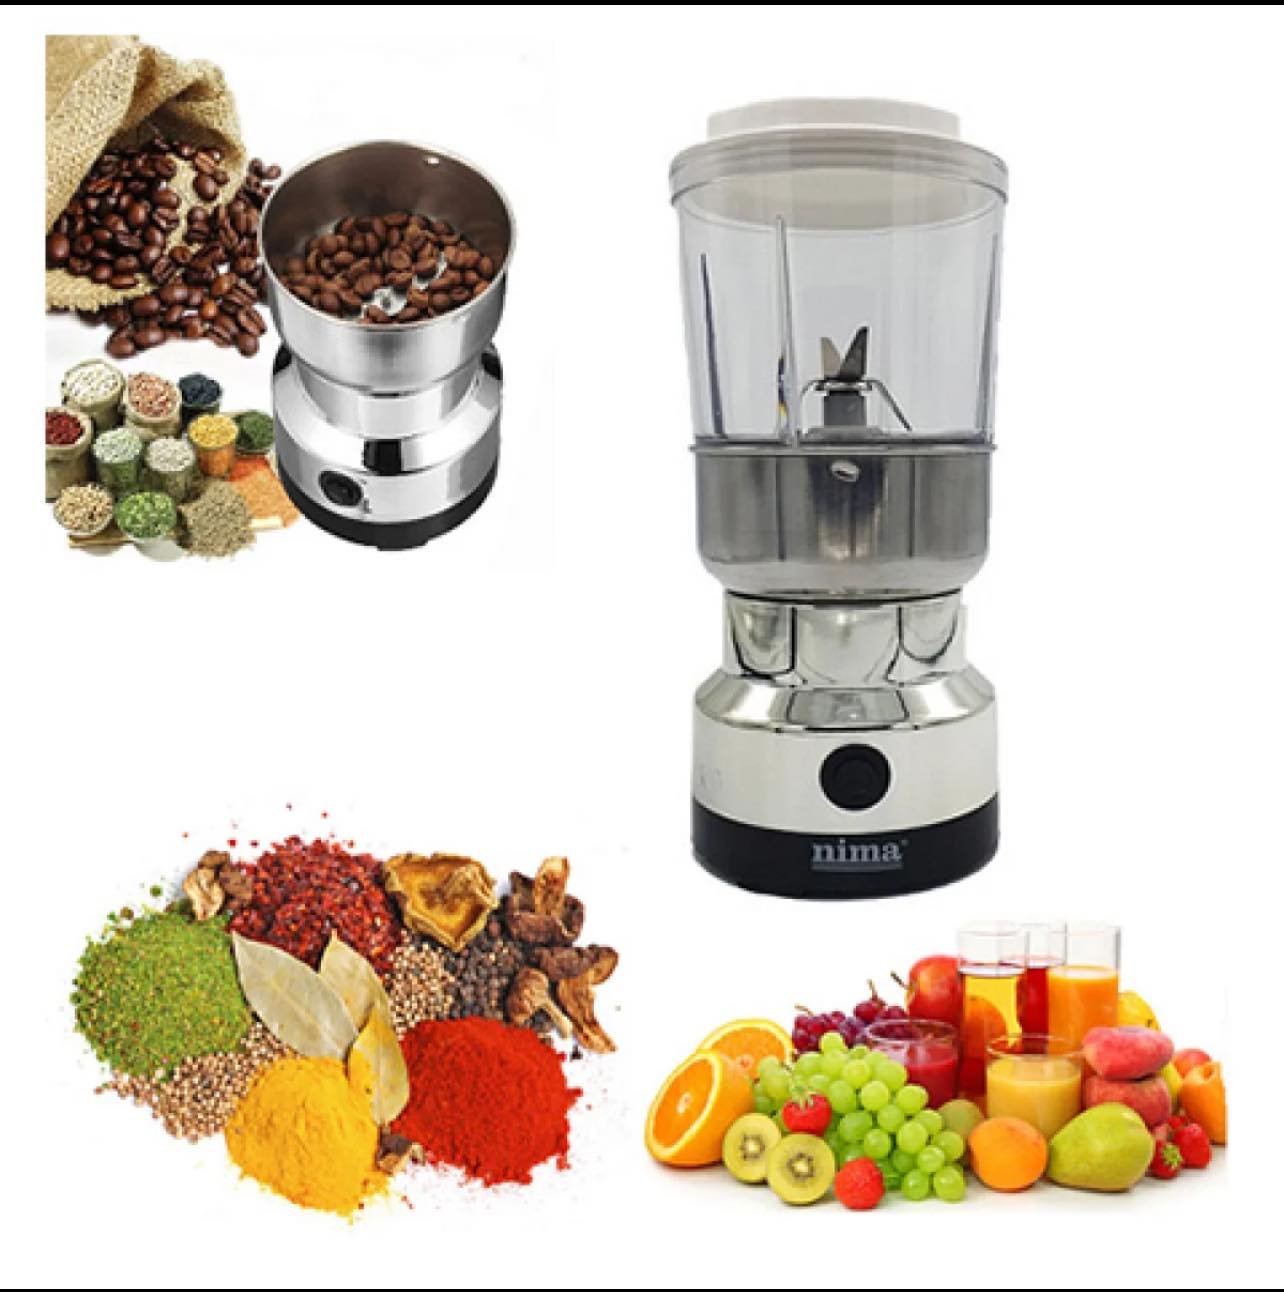 Nima Stainless Steel 2 In 1 Electric Mixer Grinder